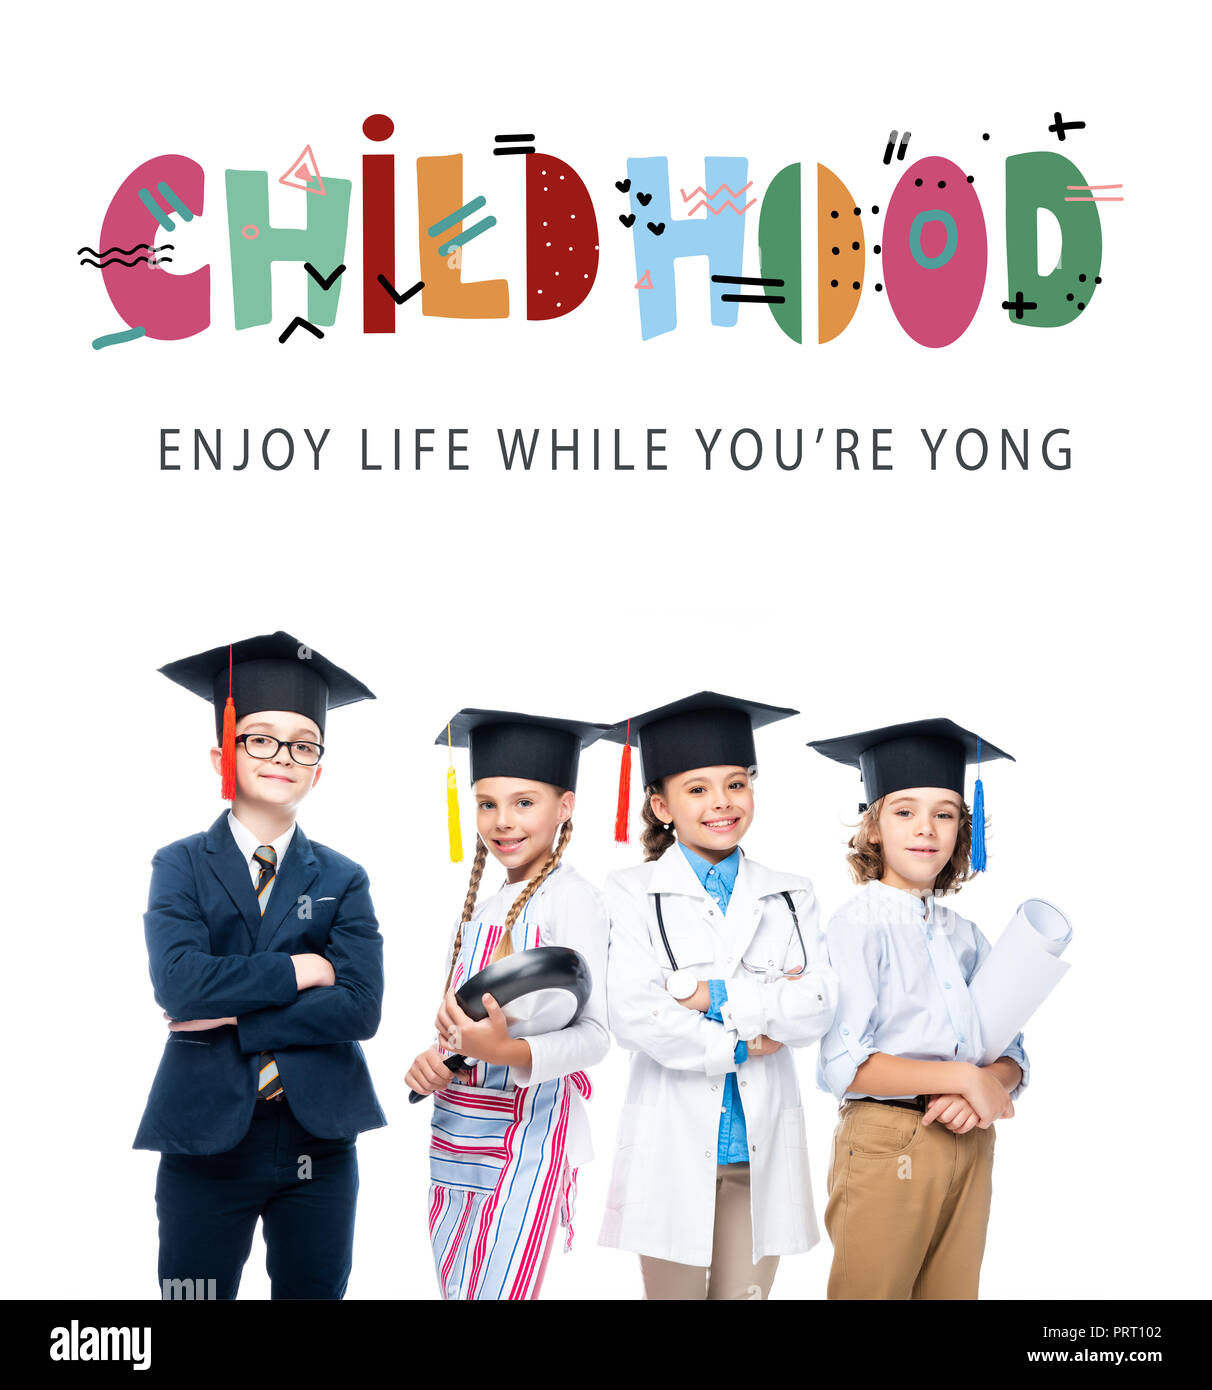 schoolchildren in costumes of different professions and graduation caps isolated on white, with 'childhood - enjoy life while youre yong' lettering Stock Photo